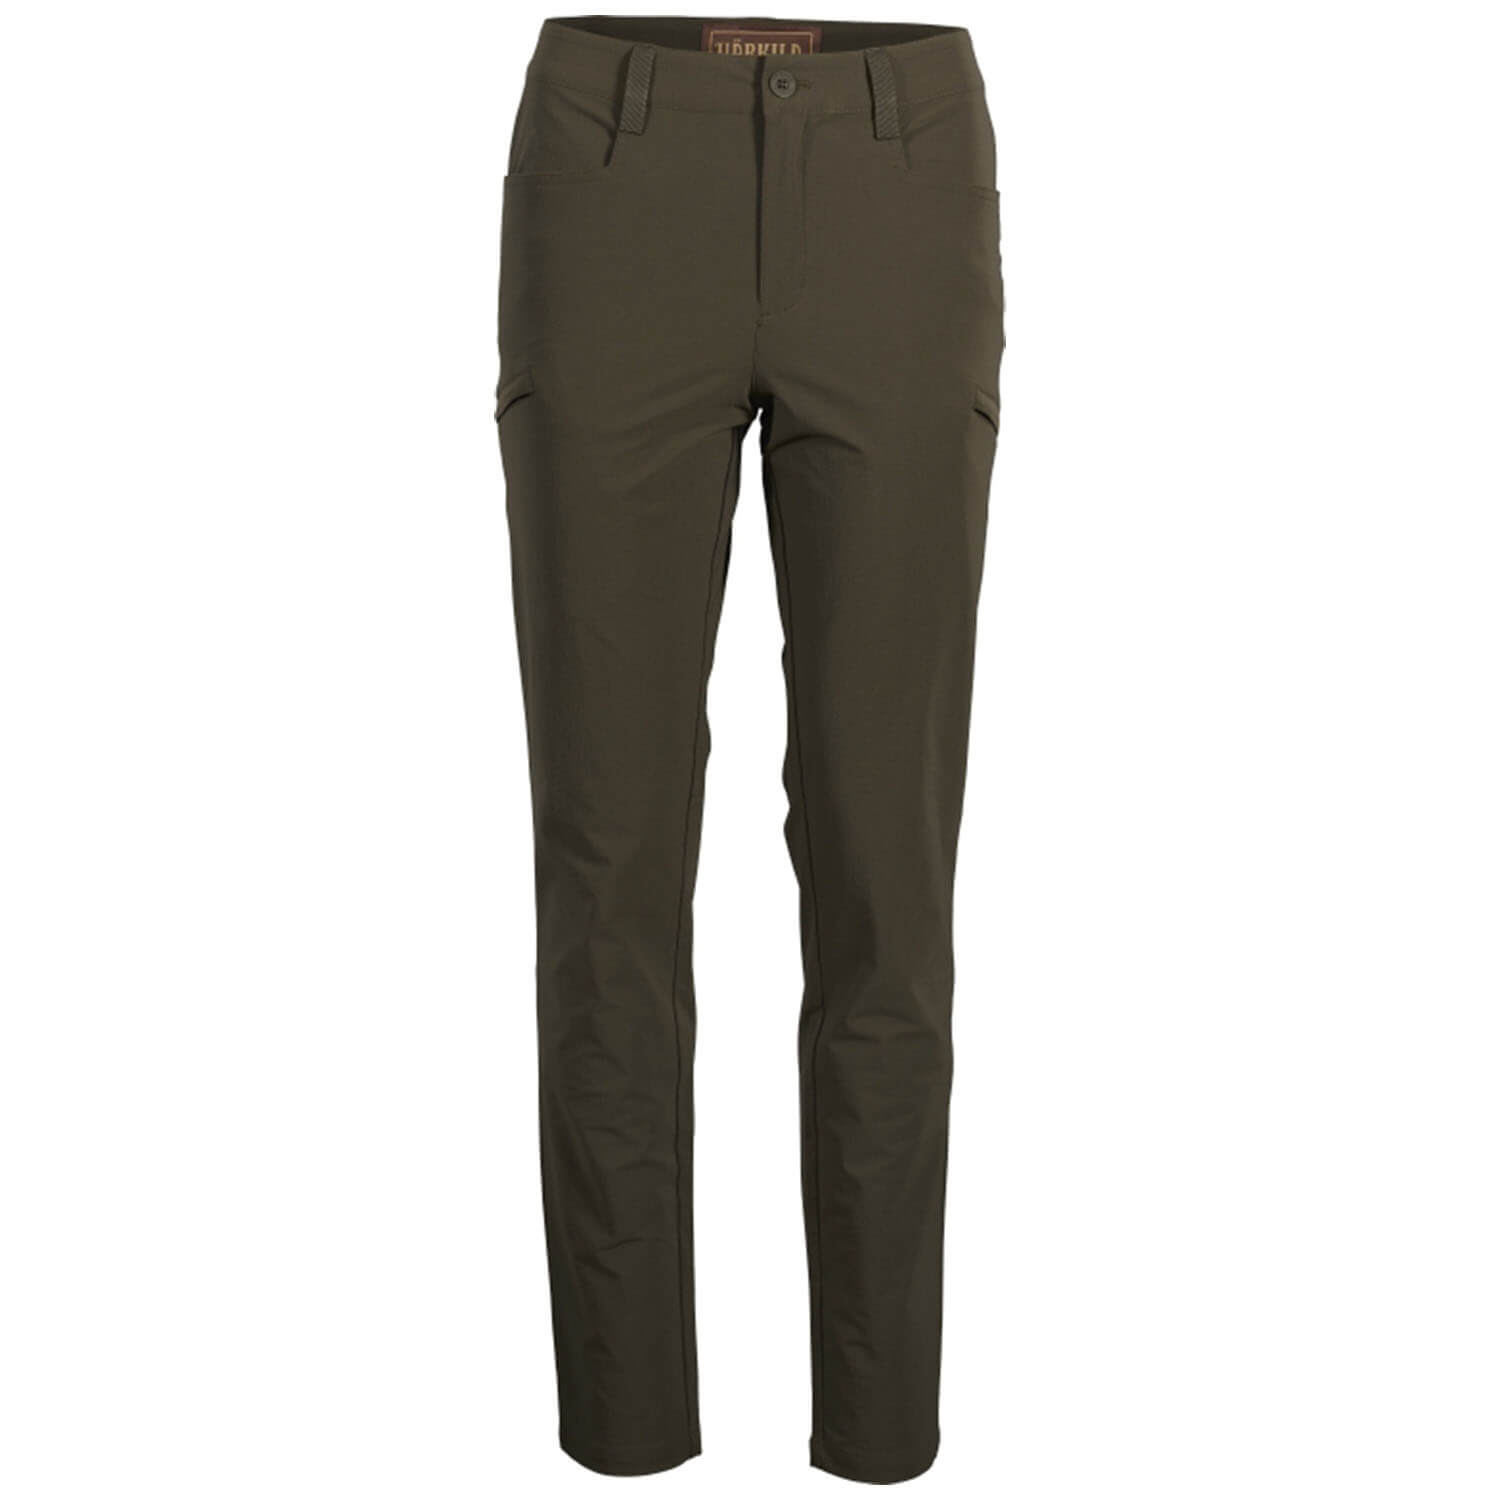 Härkila womens hunting pants trail (willow green) - Hunting Trousers